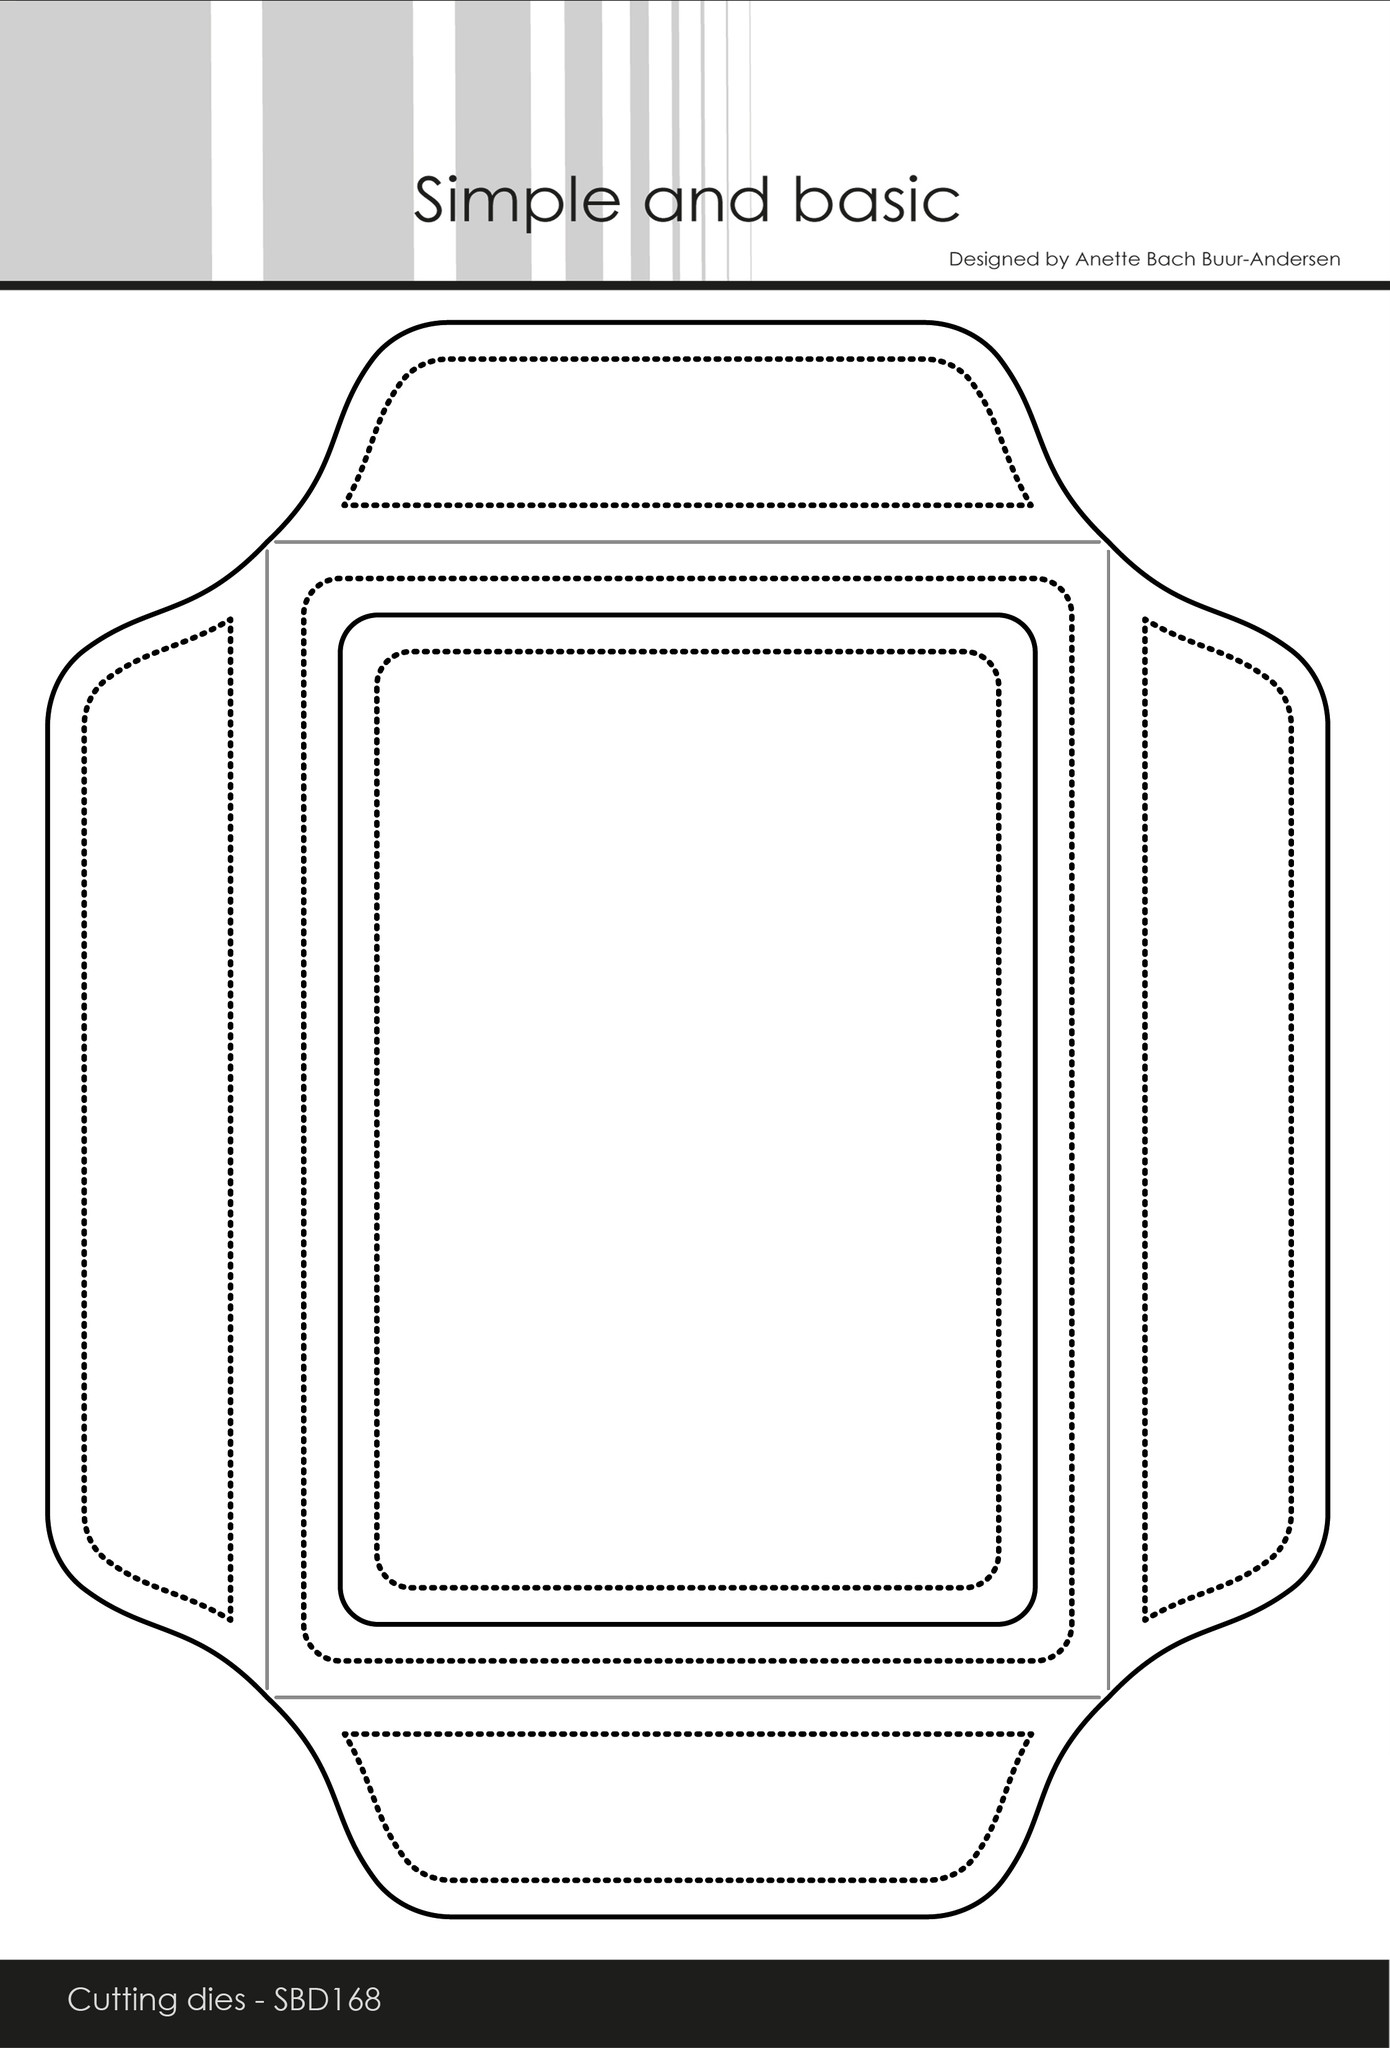 simple-and-basic-a6-envelope-cutting-dies-sbd168